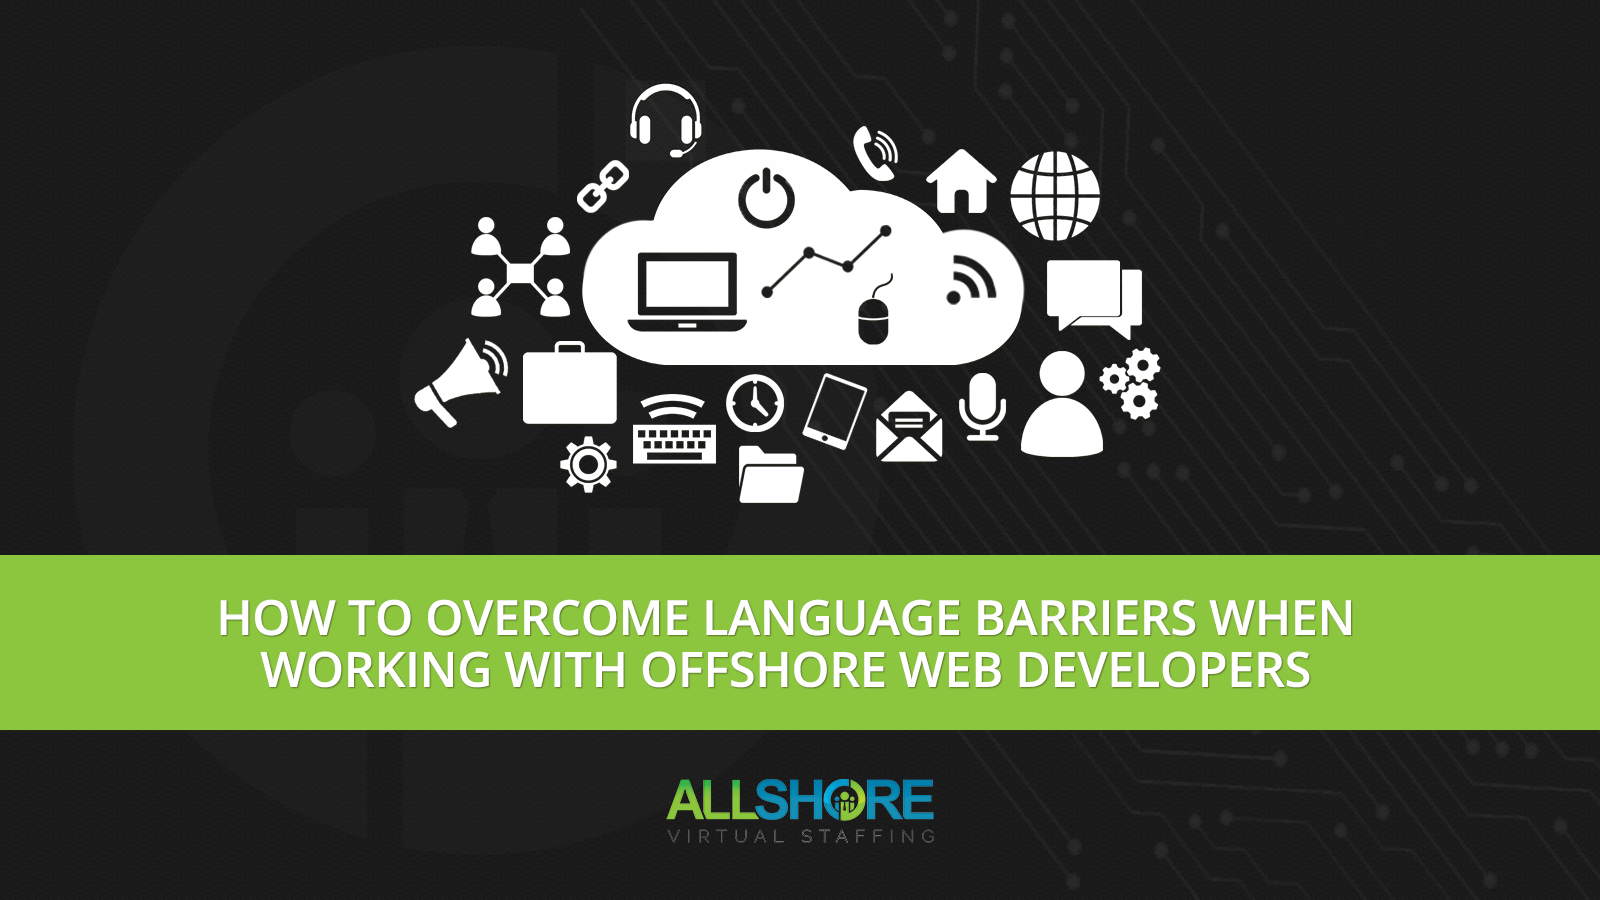 How to Overcome Language Barriers When Working With Offshore Developers